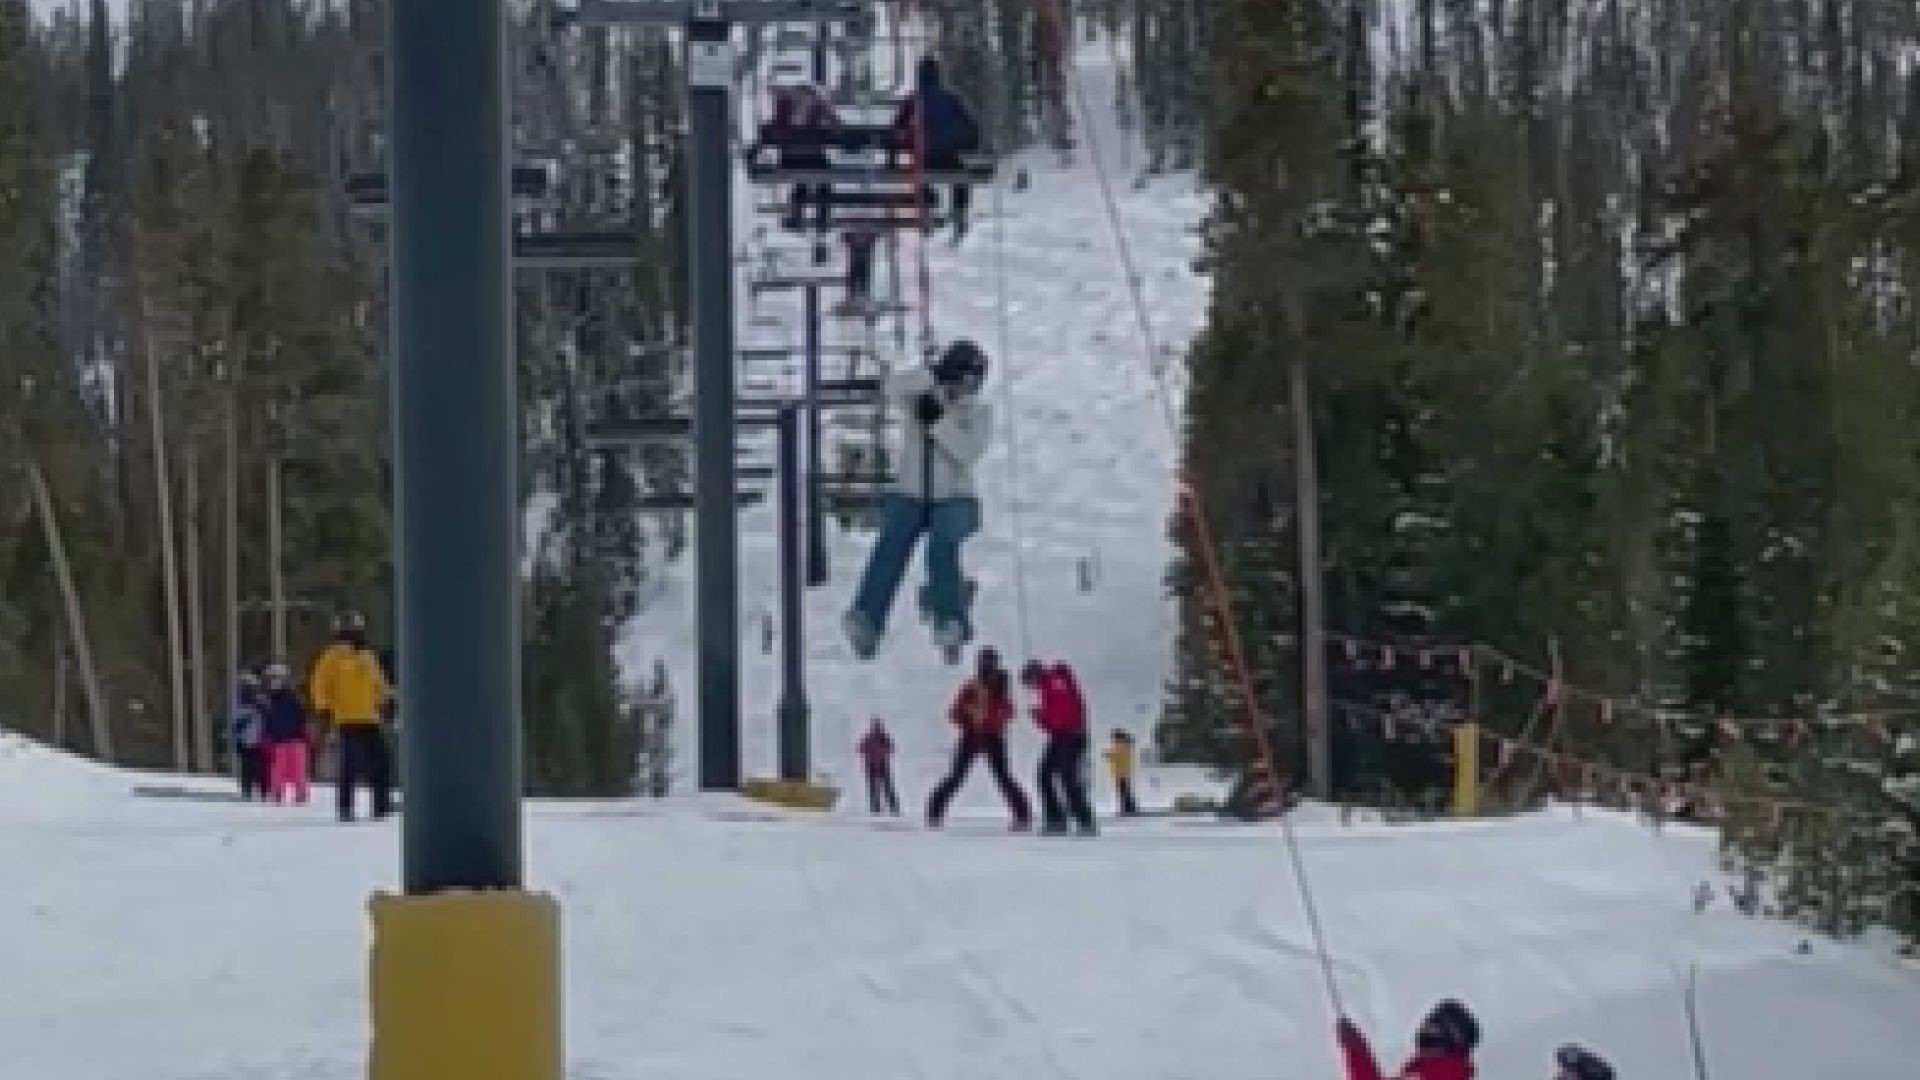 This video from Reddit user Hilo260 shows rescue crews lowering skis from a broken lift using ropes as well as shimmying between chairs.